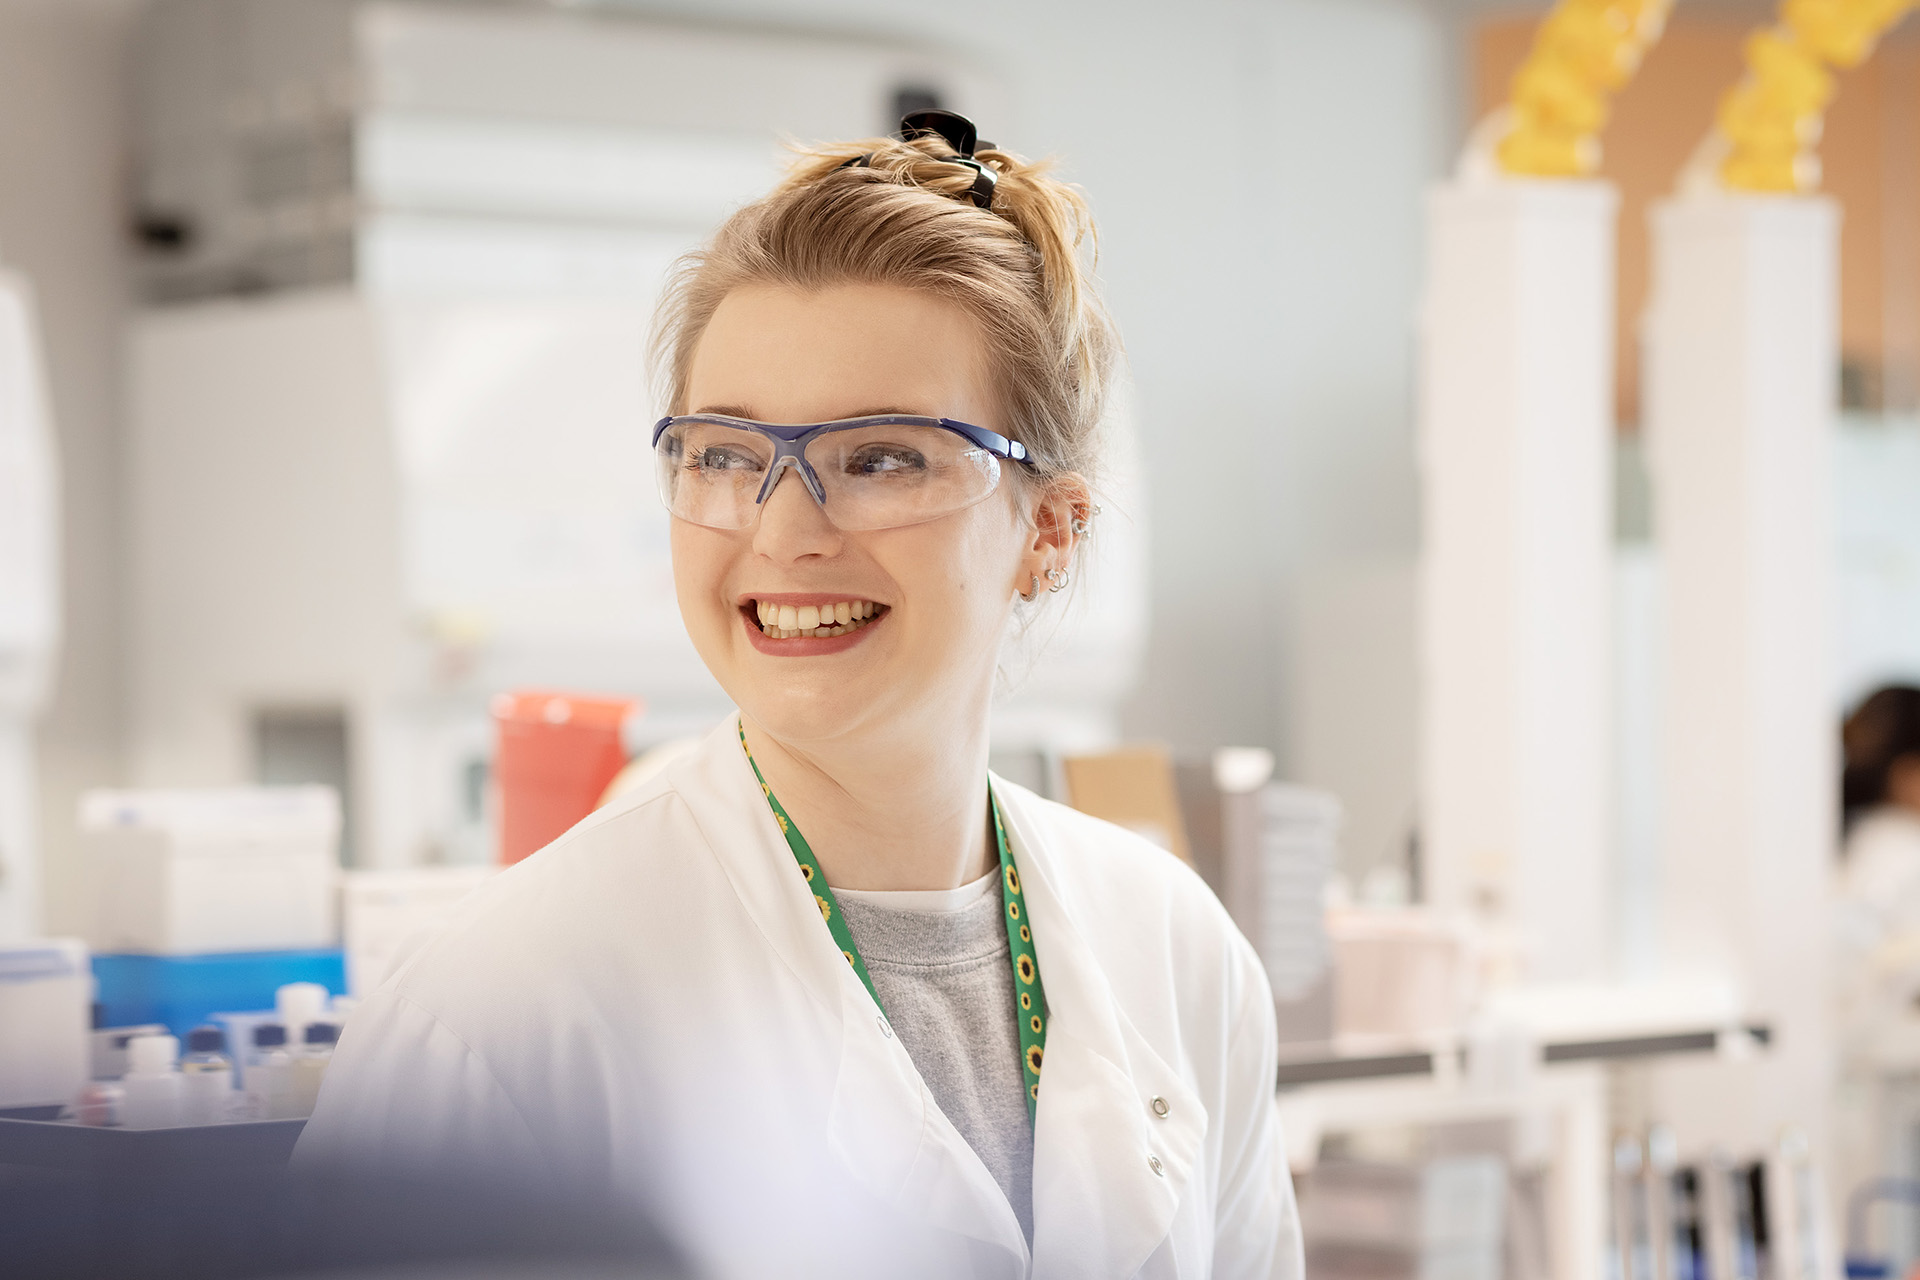 Woman smiling while in a lab coat